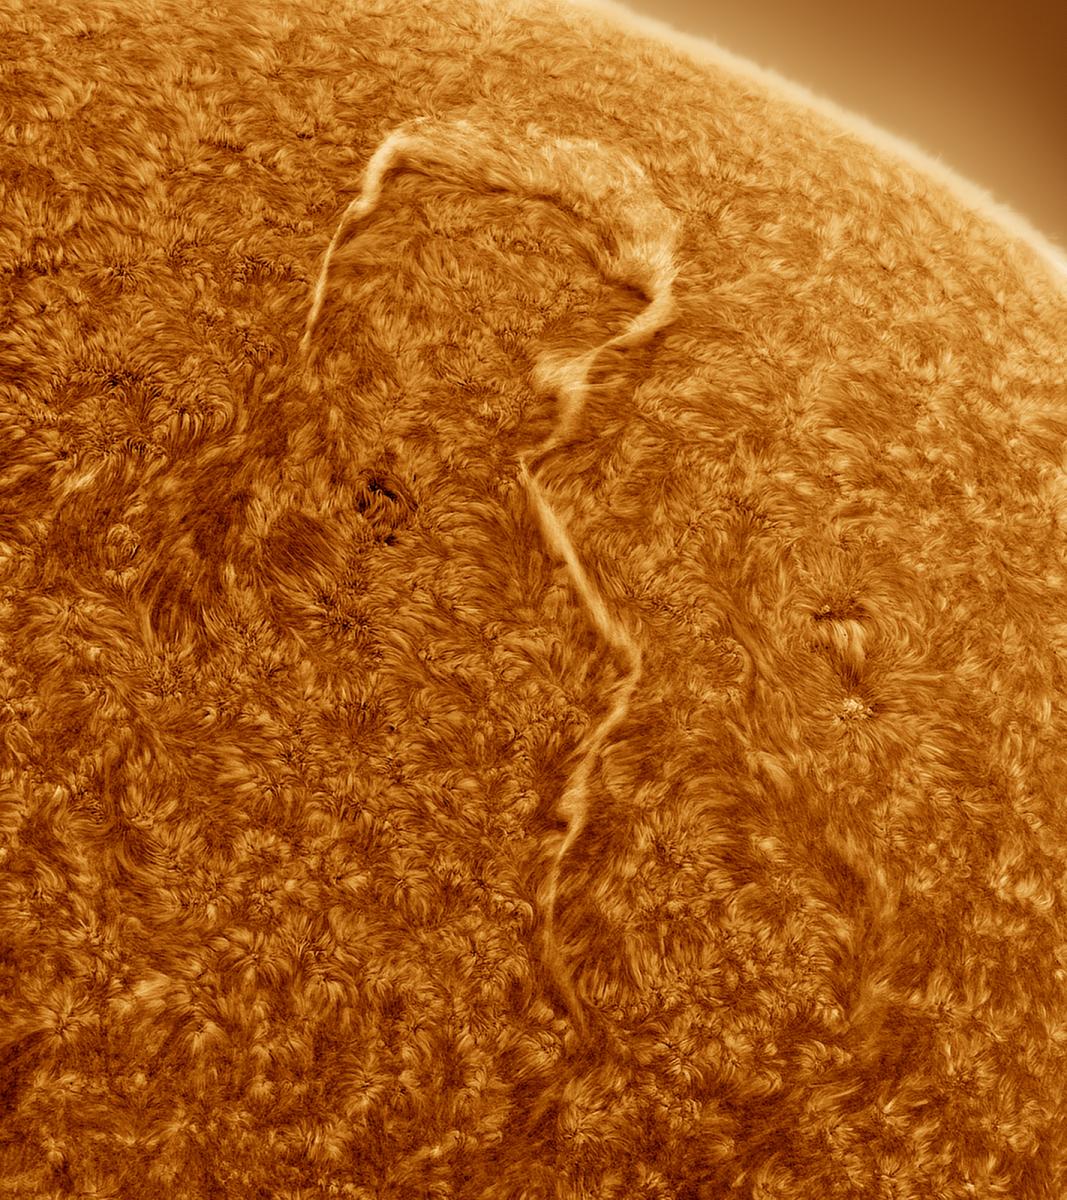 A close-up view of the Sun's surface taken using a telescope. The boiling orange surface includes a yellow flare that looks a little like a question mark